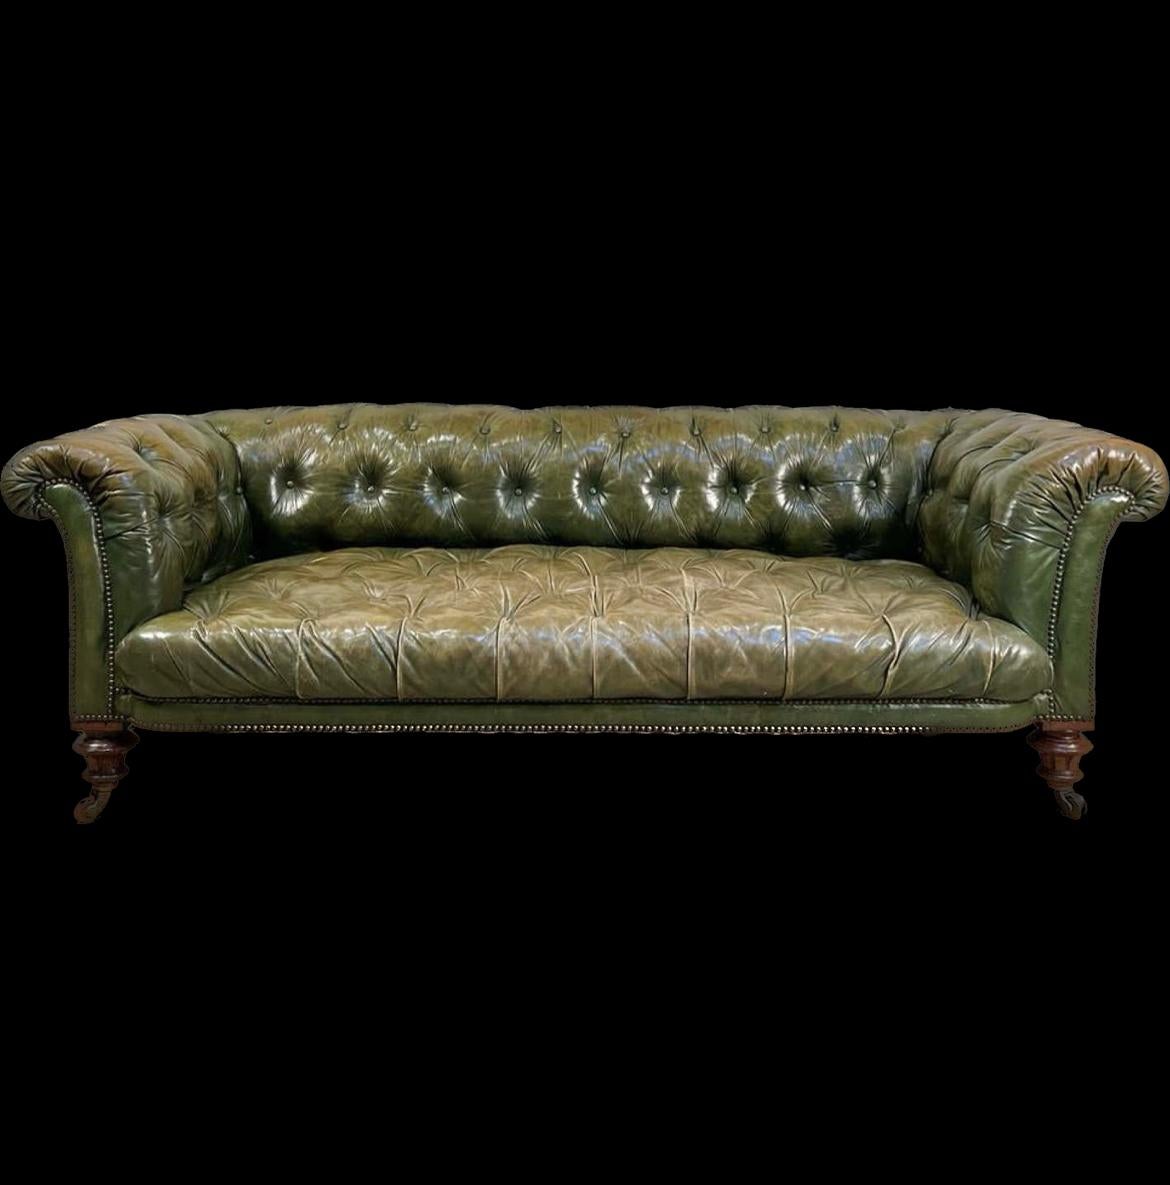 As a Lapada dealer and furniture maker, I always have a very good selection of pieces in stock with a wide range of price points.

This particular piece is an originalWilliam IV early 19thC Chesterfield in very very good order. 

As you can see the